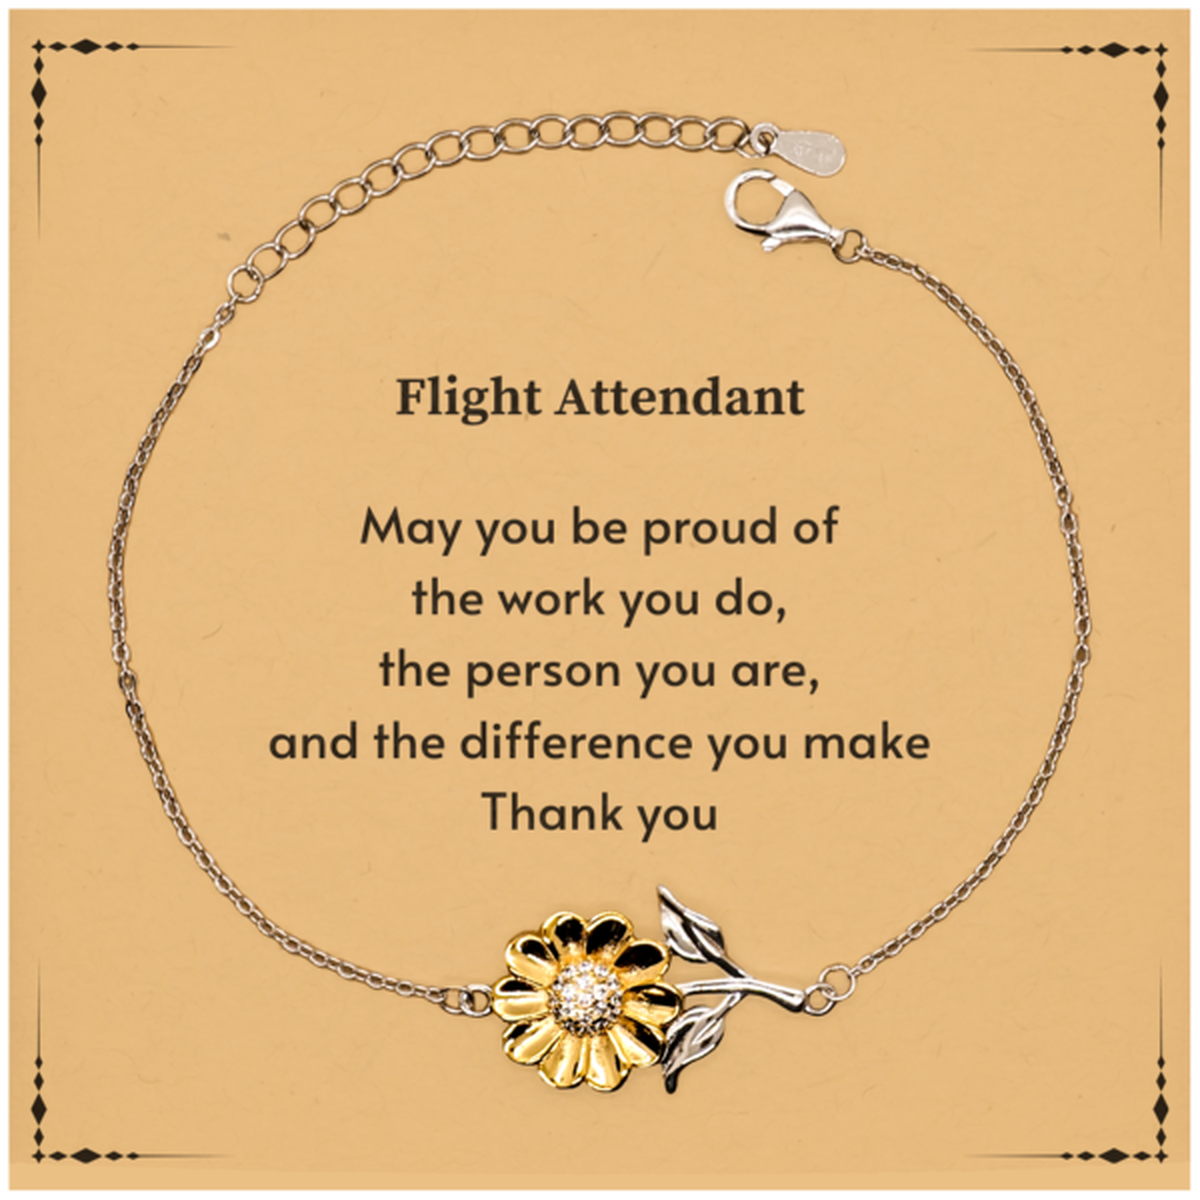 Heartwarming Sunflower Bracelet Retirement Coworkers Gifts for Flight Attendant, Flight Attendant May You be proud of the work you do, the person you are Gifts for Boss Men Women Friends